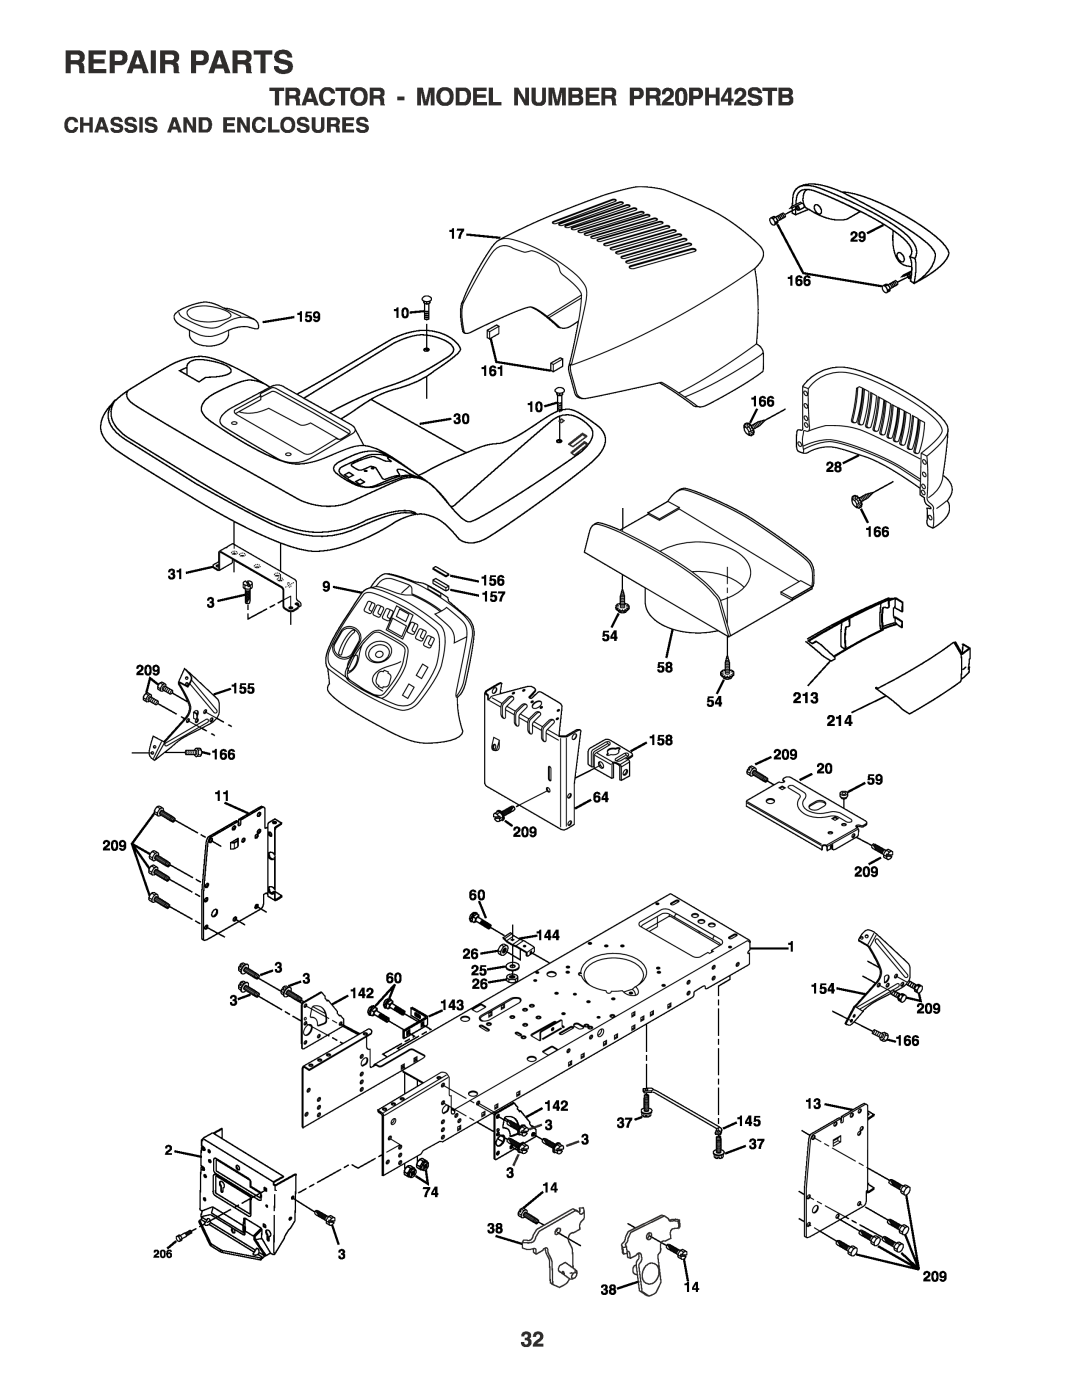 Poulan owner manual Chassis And Enclosures, Repair Parts, TRACTOR - MODEL NUMBER PR20PH42STB 